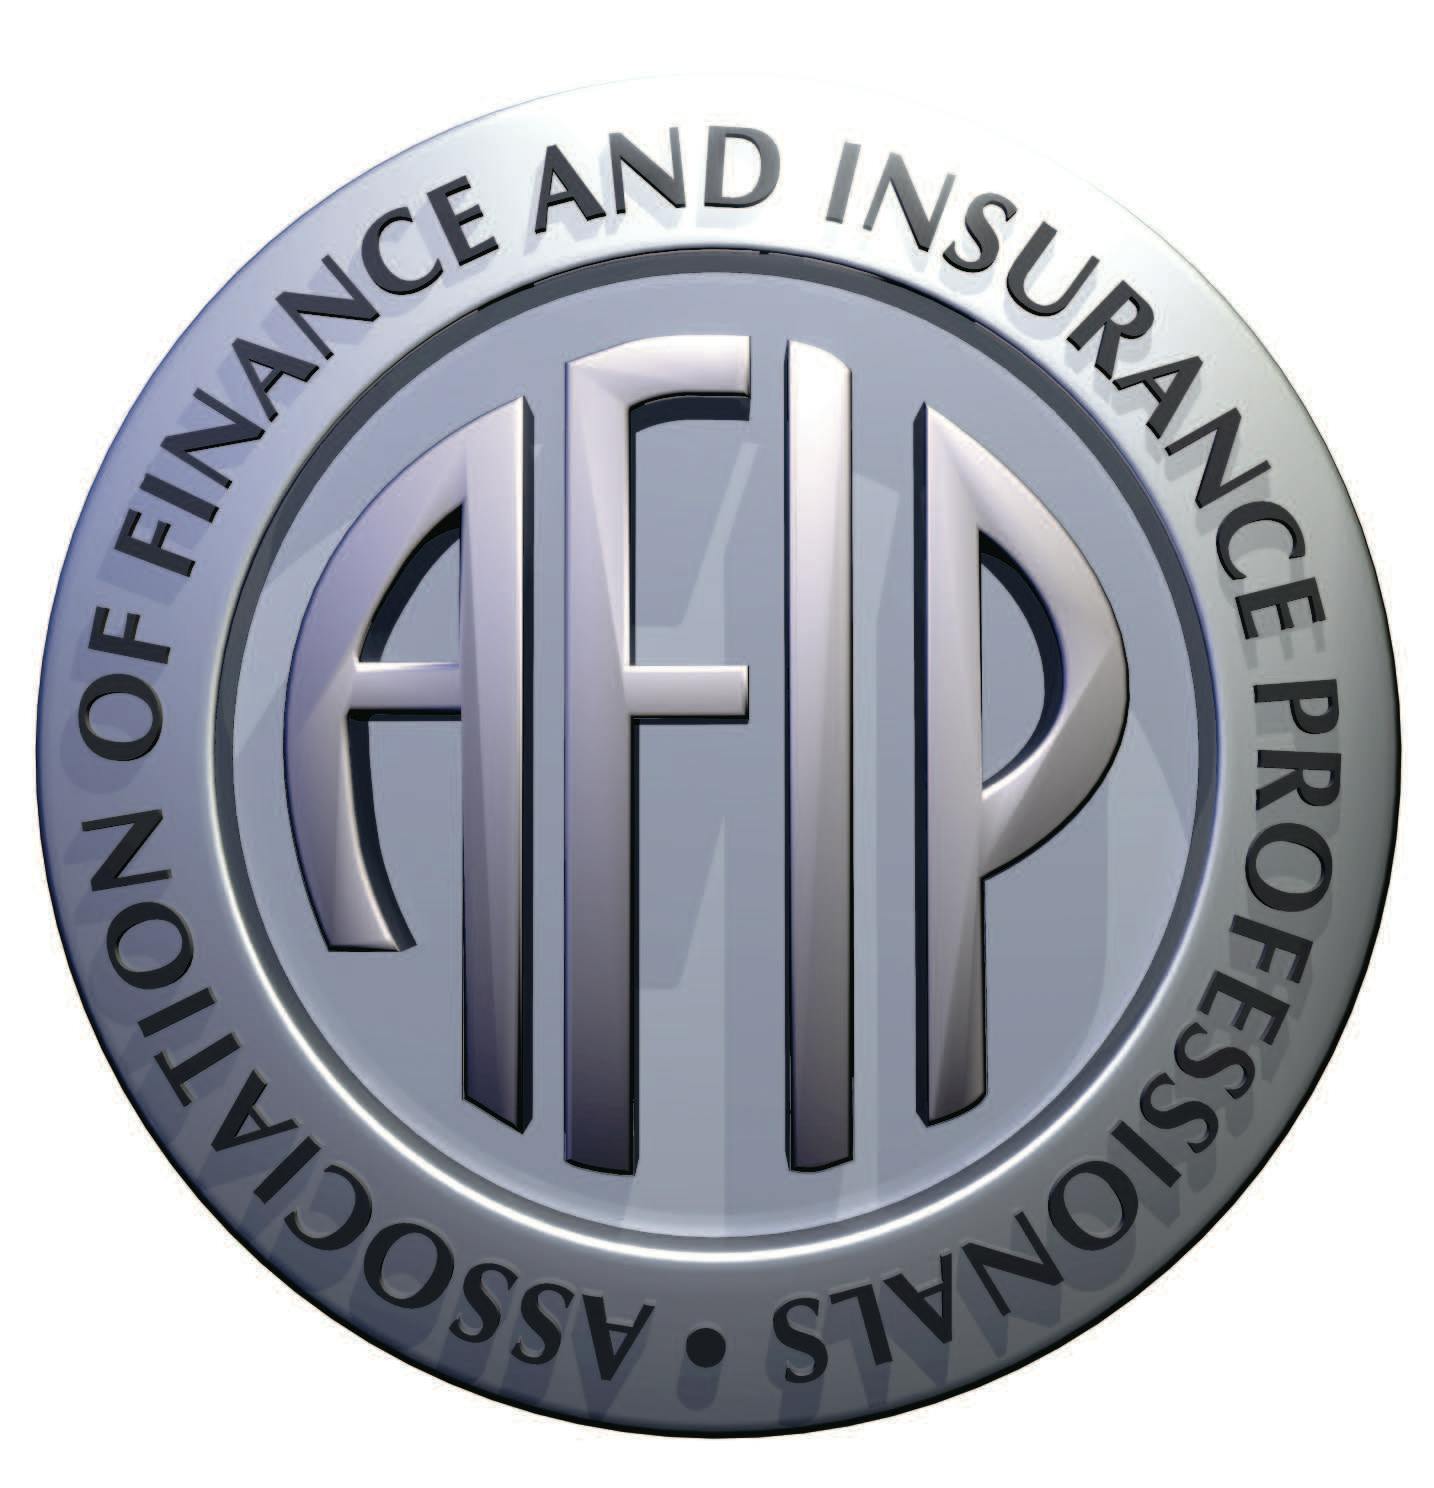 AFIP Certification Study Group - Session III - (10:00 am CST - CENTRAL TIME)